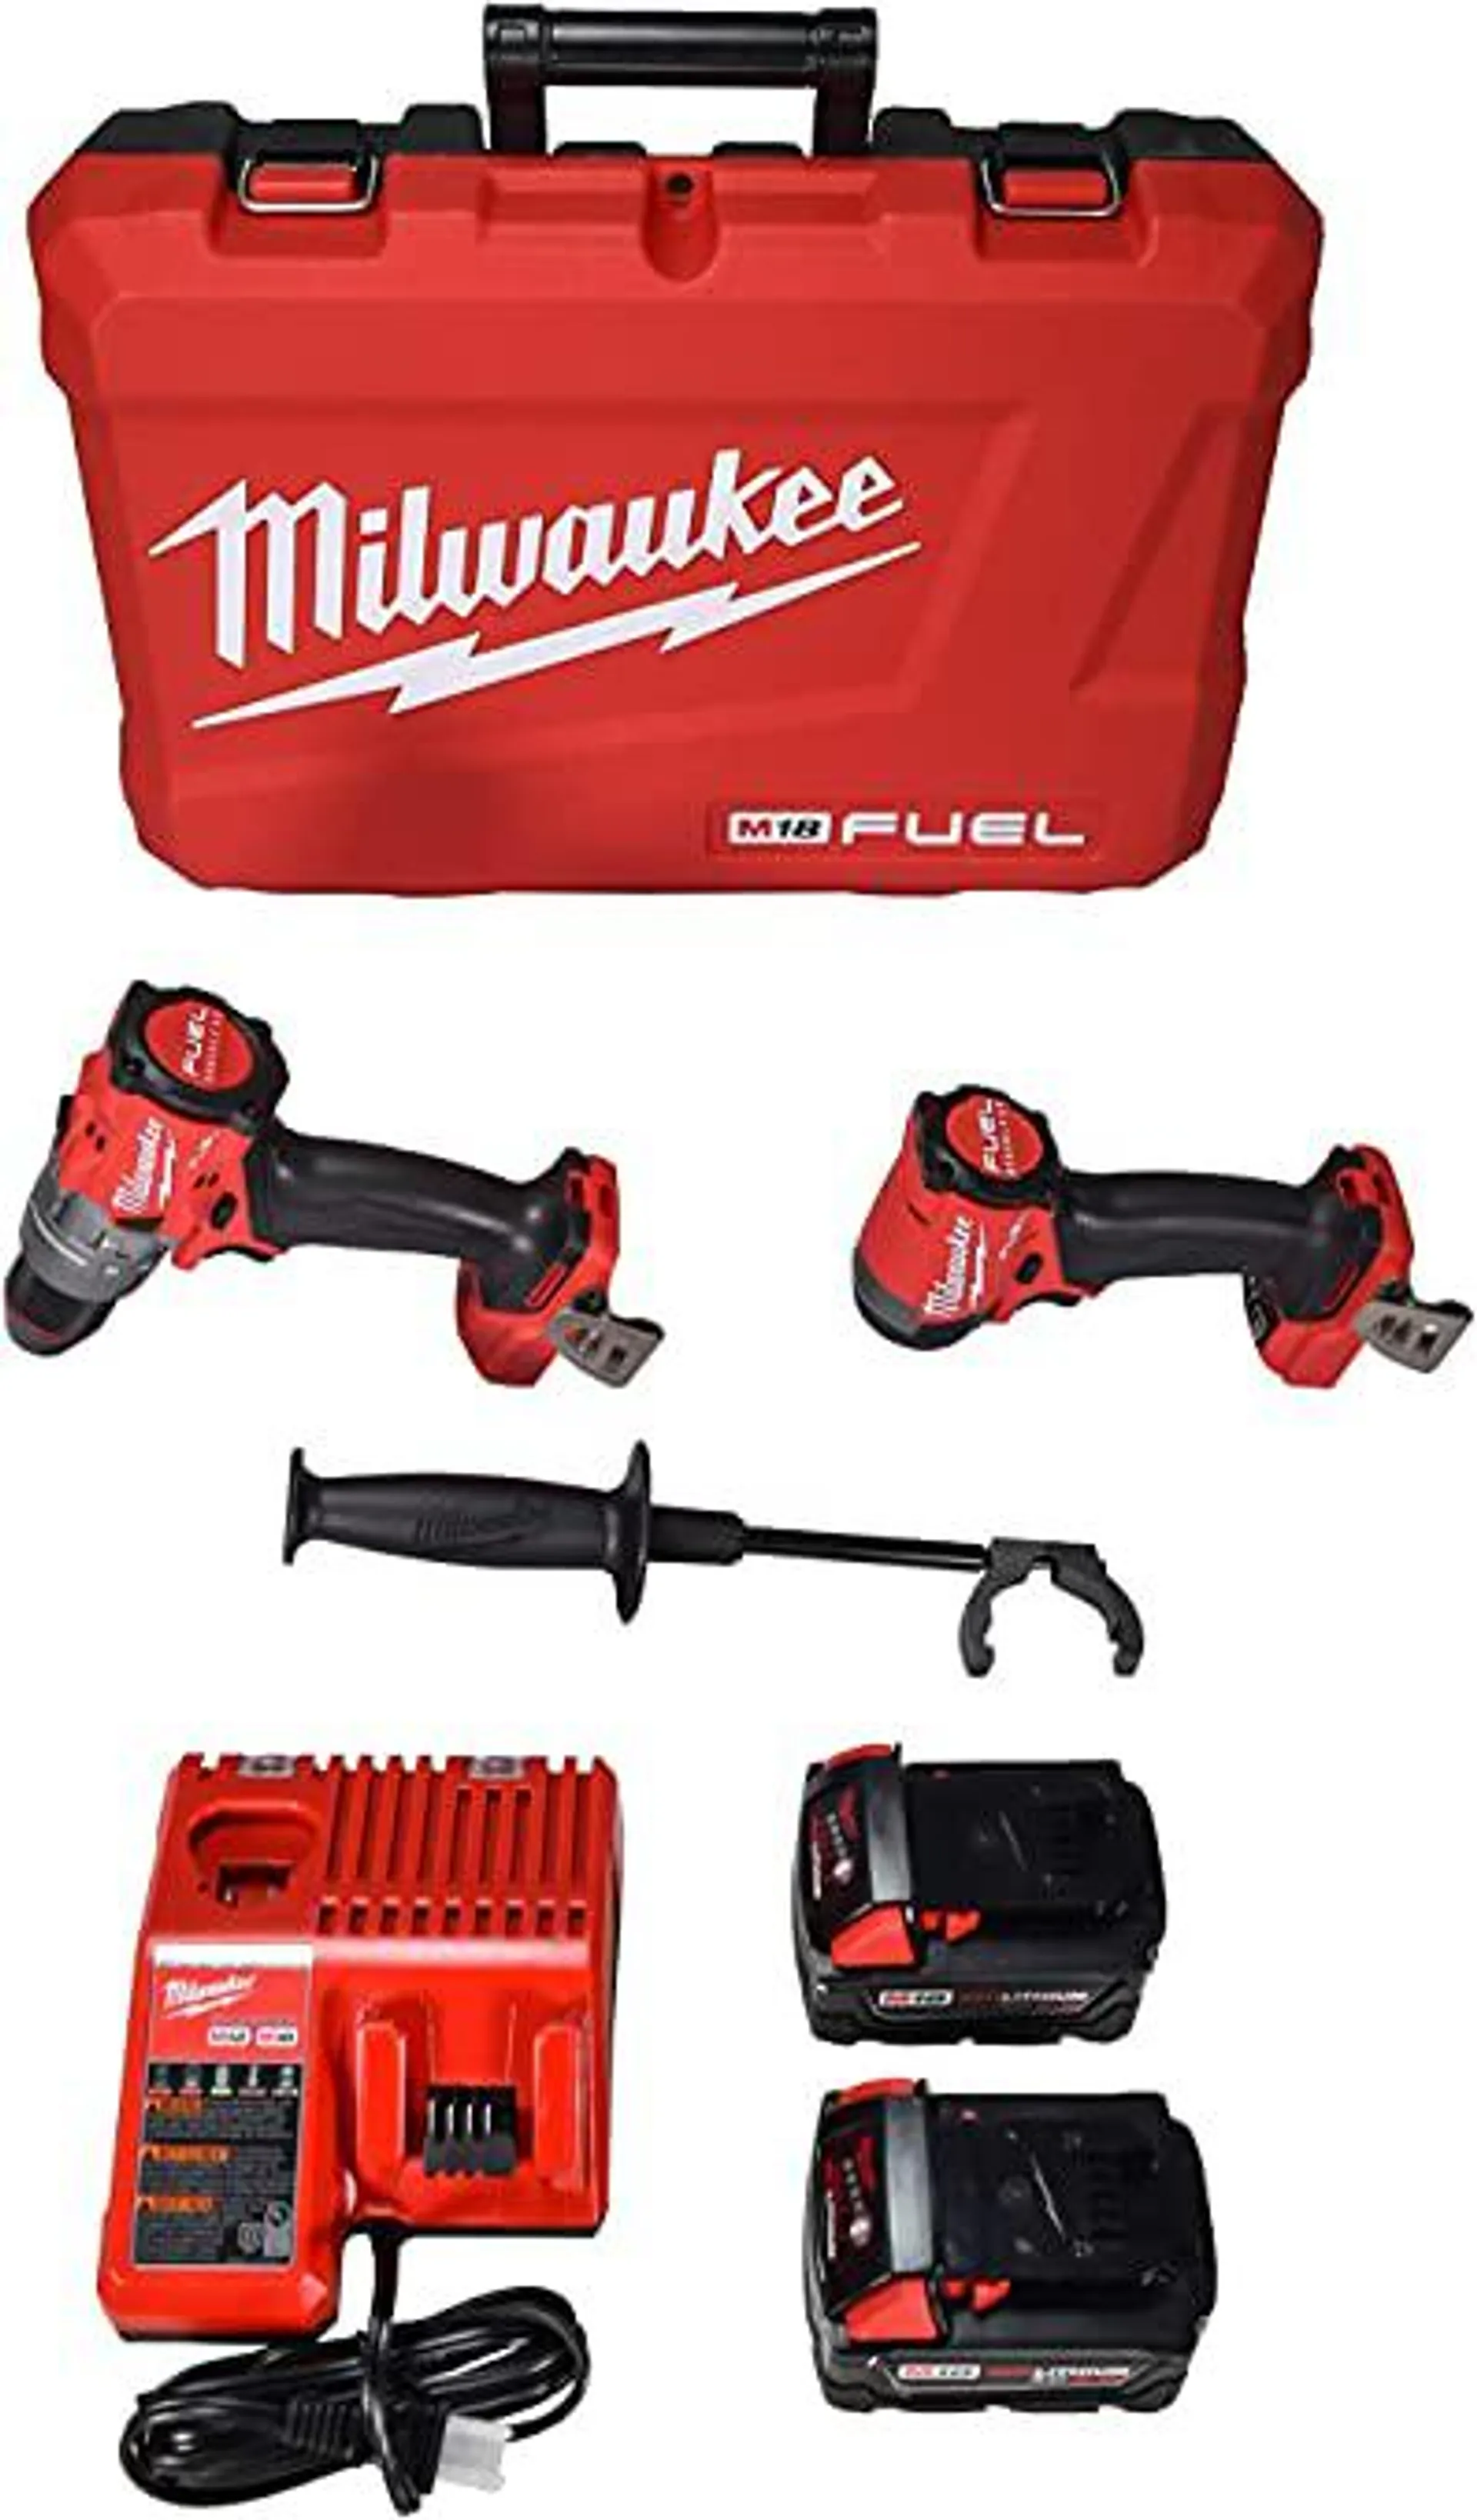 Milwaukee 3697-22 18V Lithium-Ion Brushless Cordless Hammer Drill and Impact Driver Combo Kit (2-Tool) with (2) 5.0Ah Batteries, Charger & Tool Case